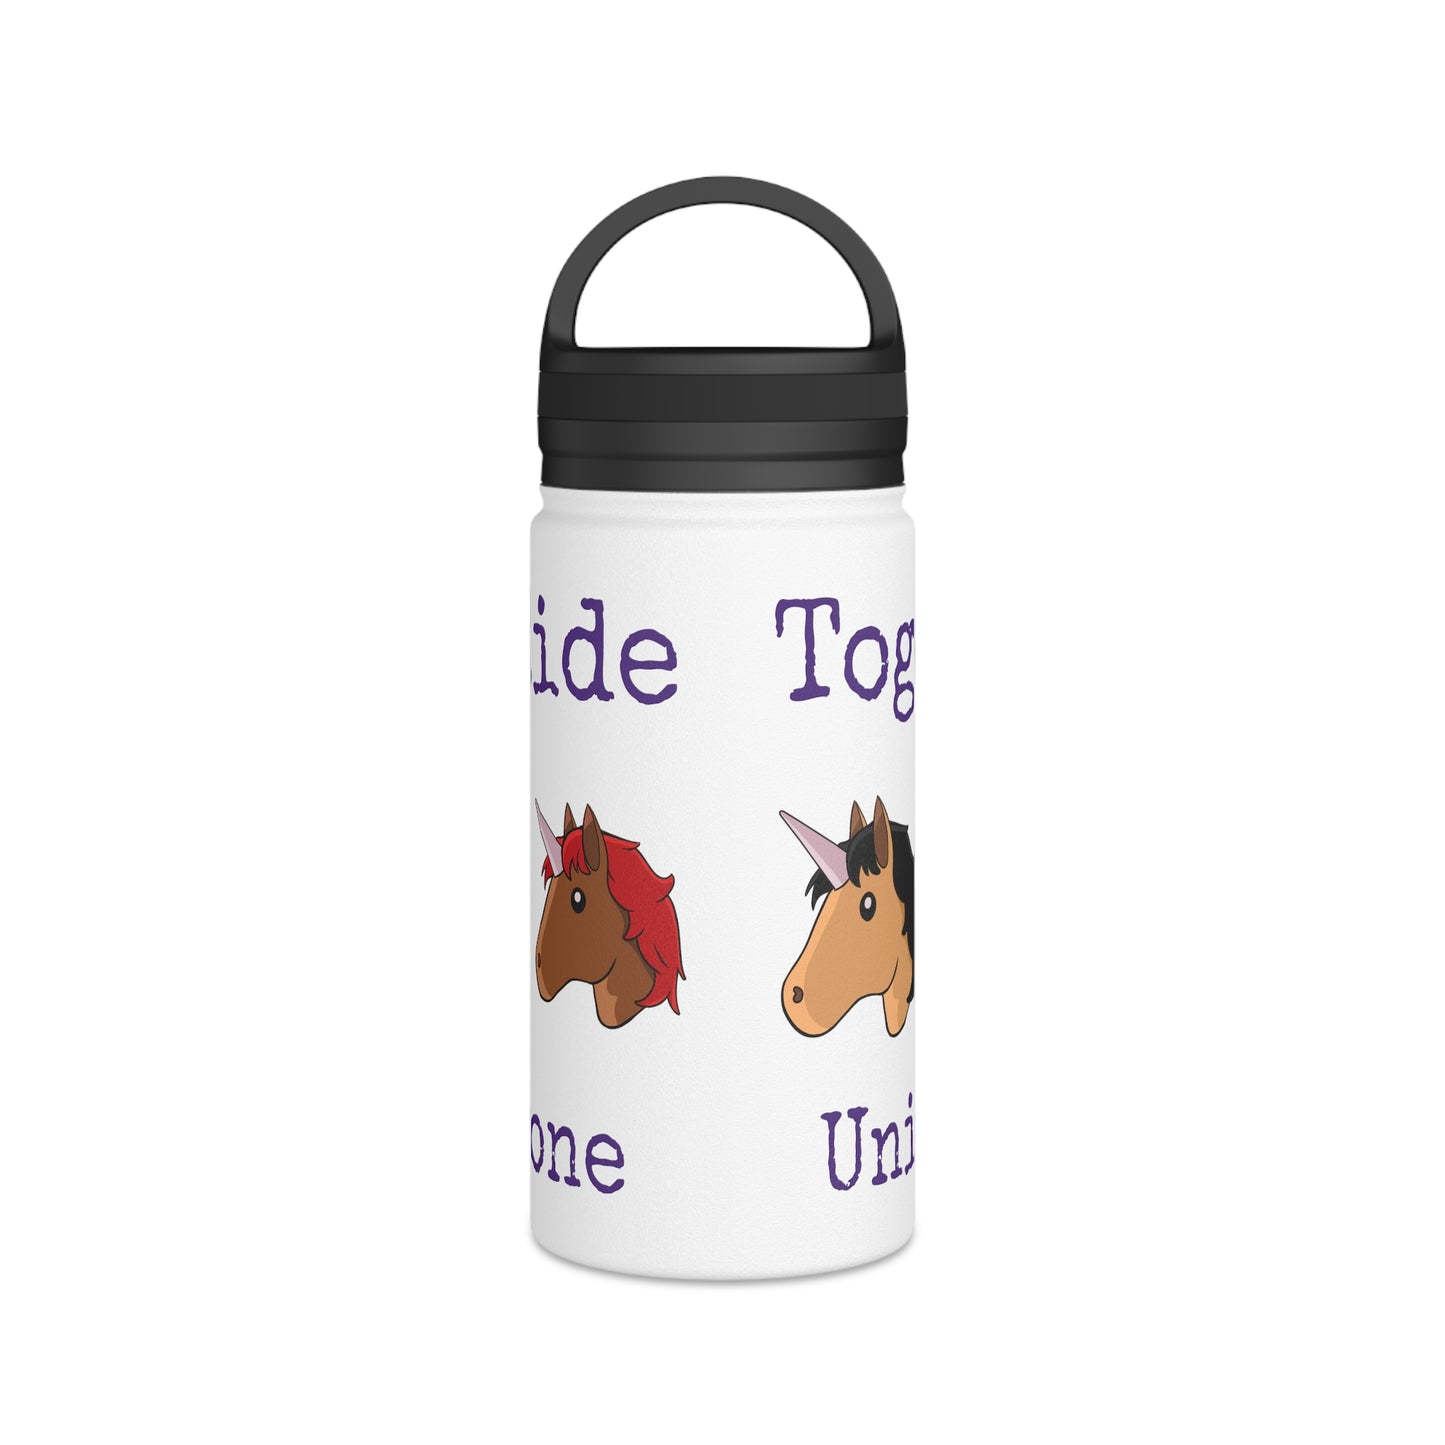 Together we Ride Unicorns4everyone #3 Stainless Steel Water Bottle